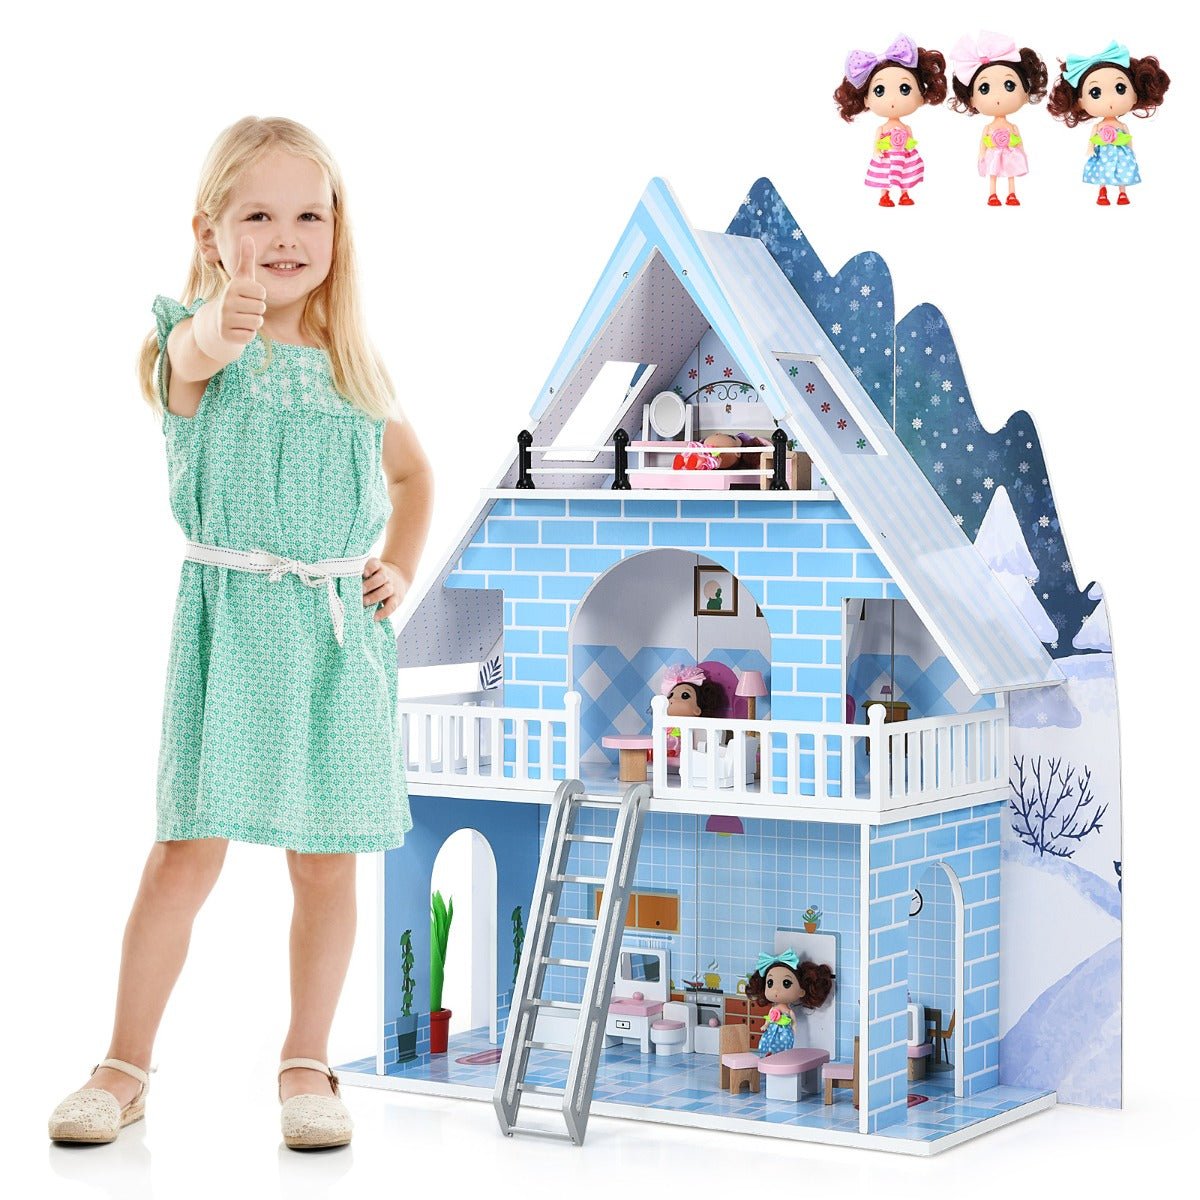 Home Sweet Home: Wooden Dollhouse Playset with 15-Piece Furniture for Imaginative Play